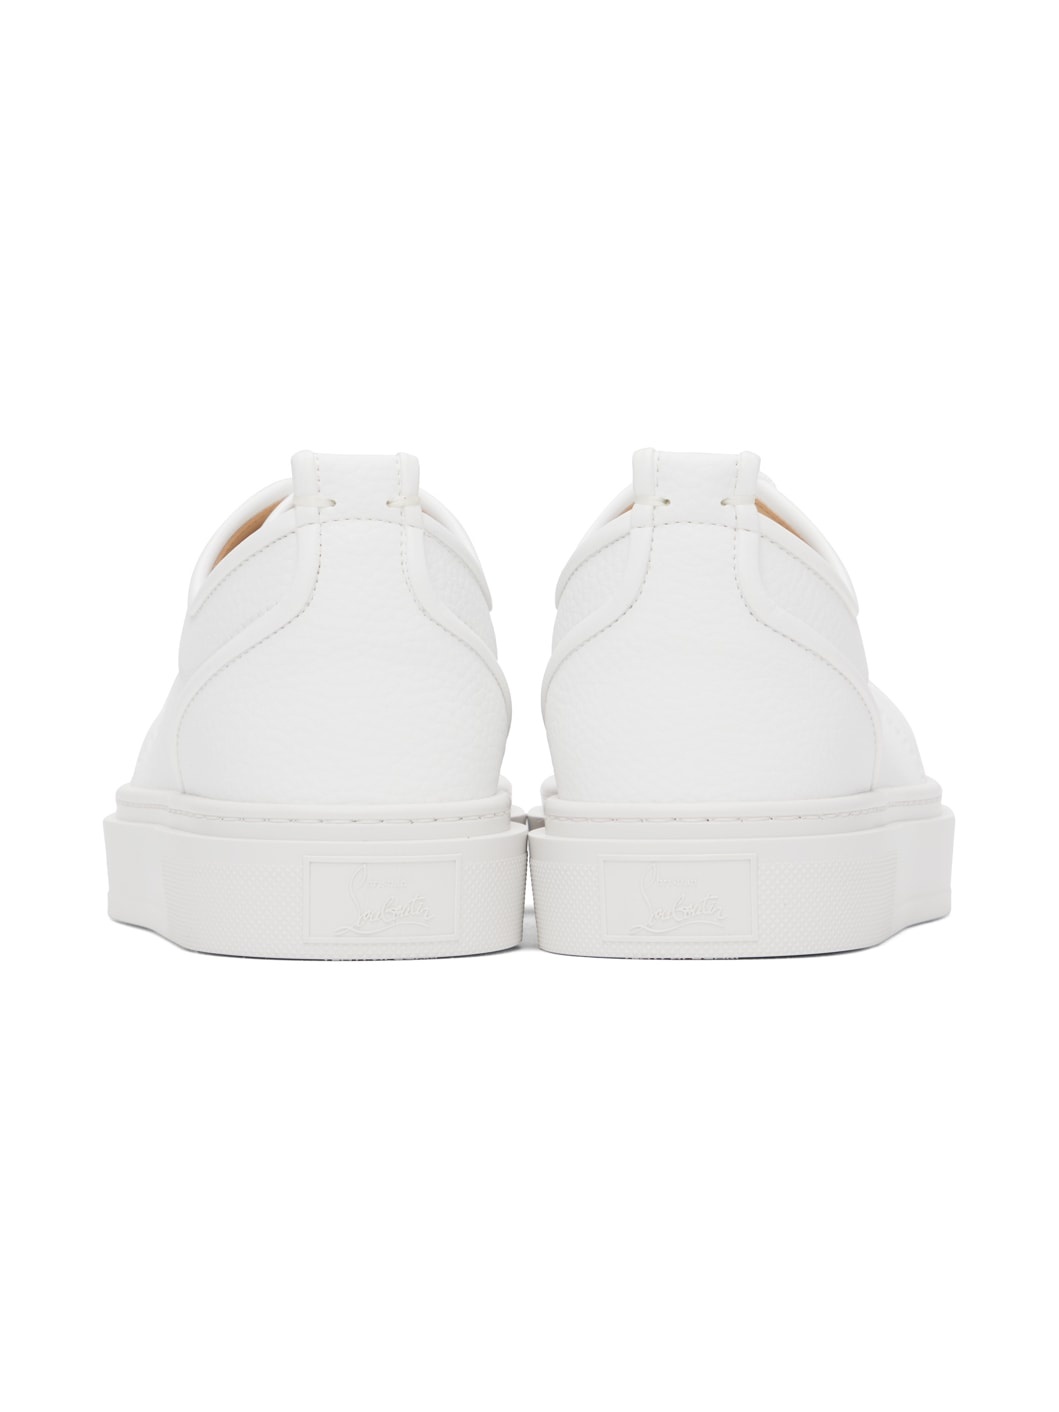 Adolon Junior White Recycled materials - Men Shoes - Christian